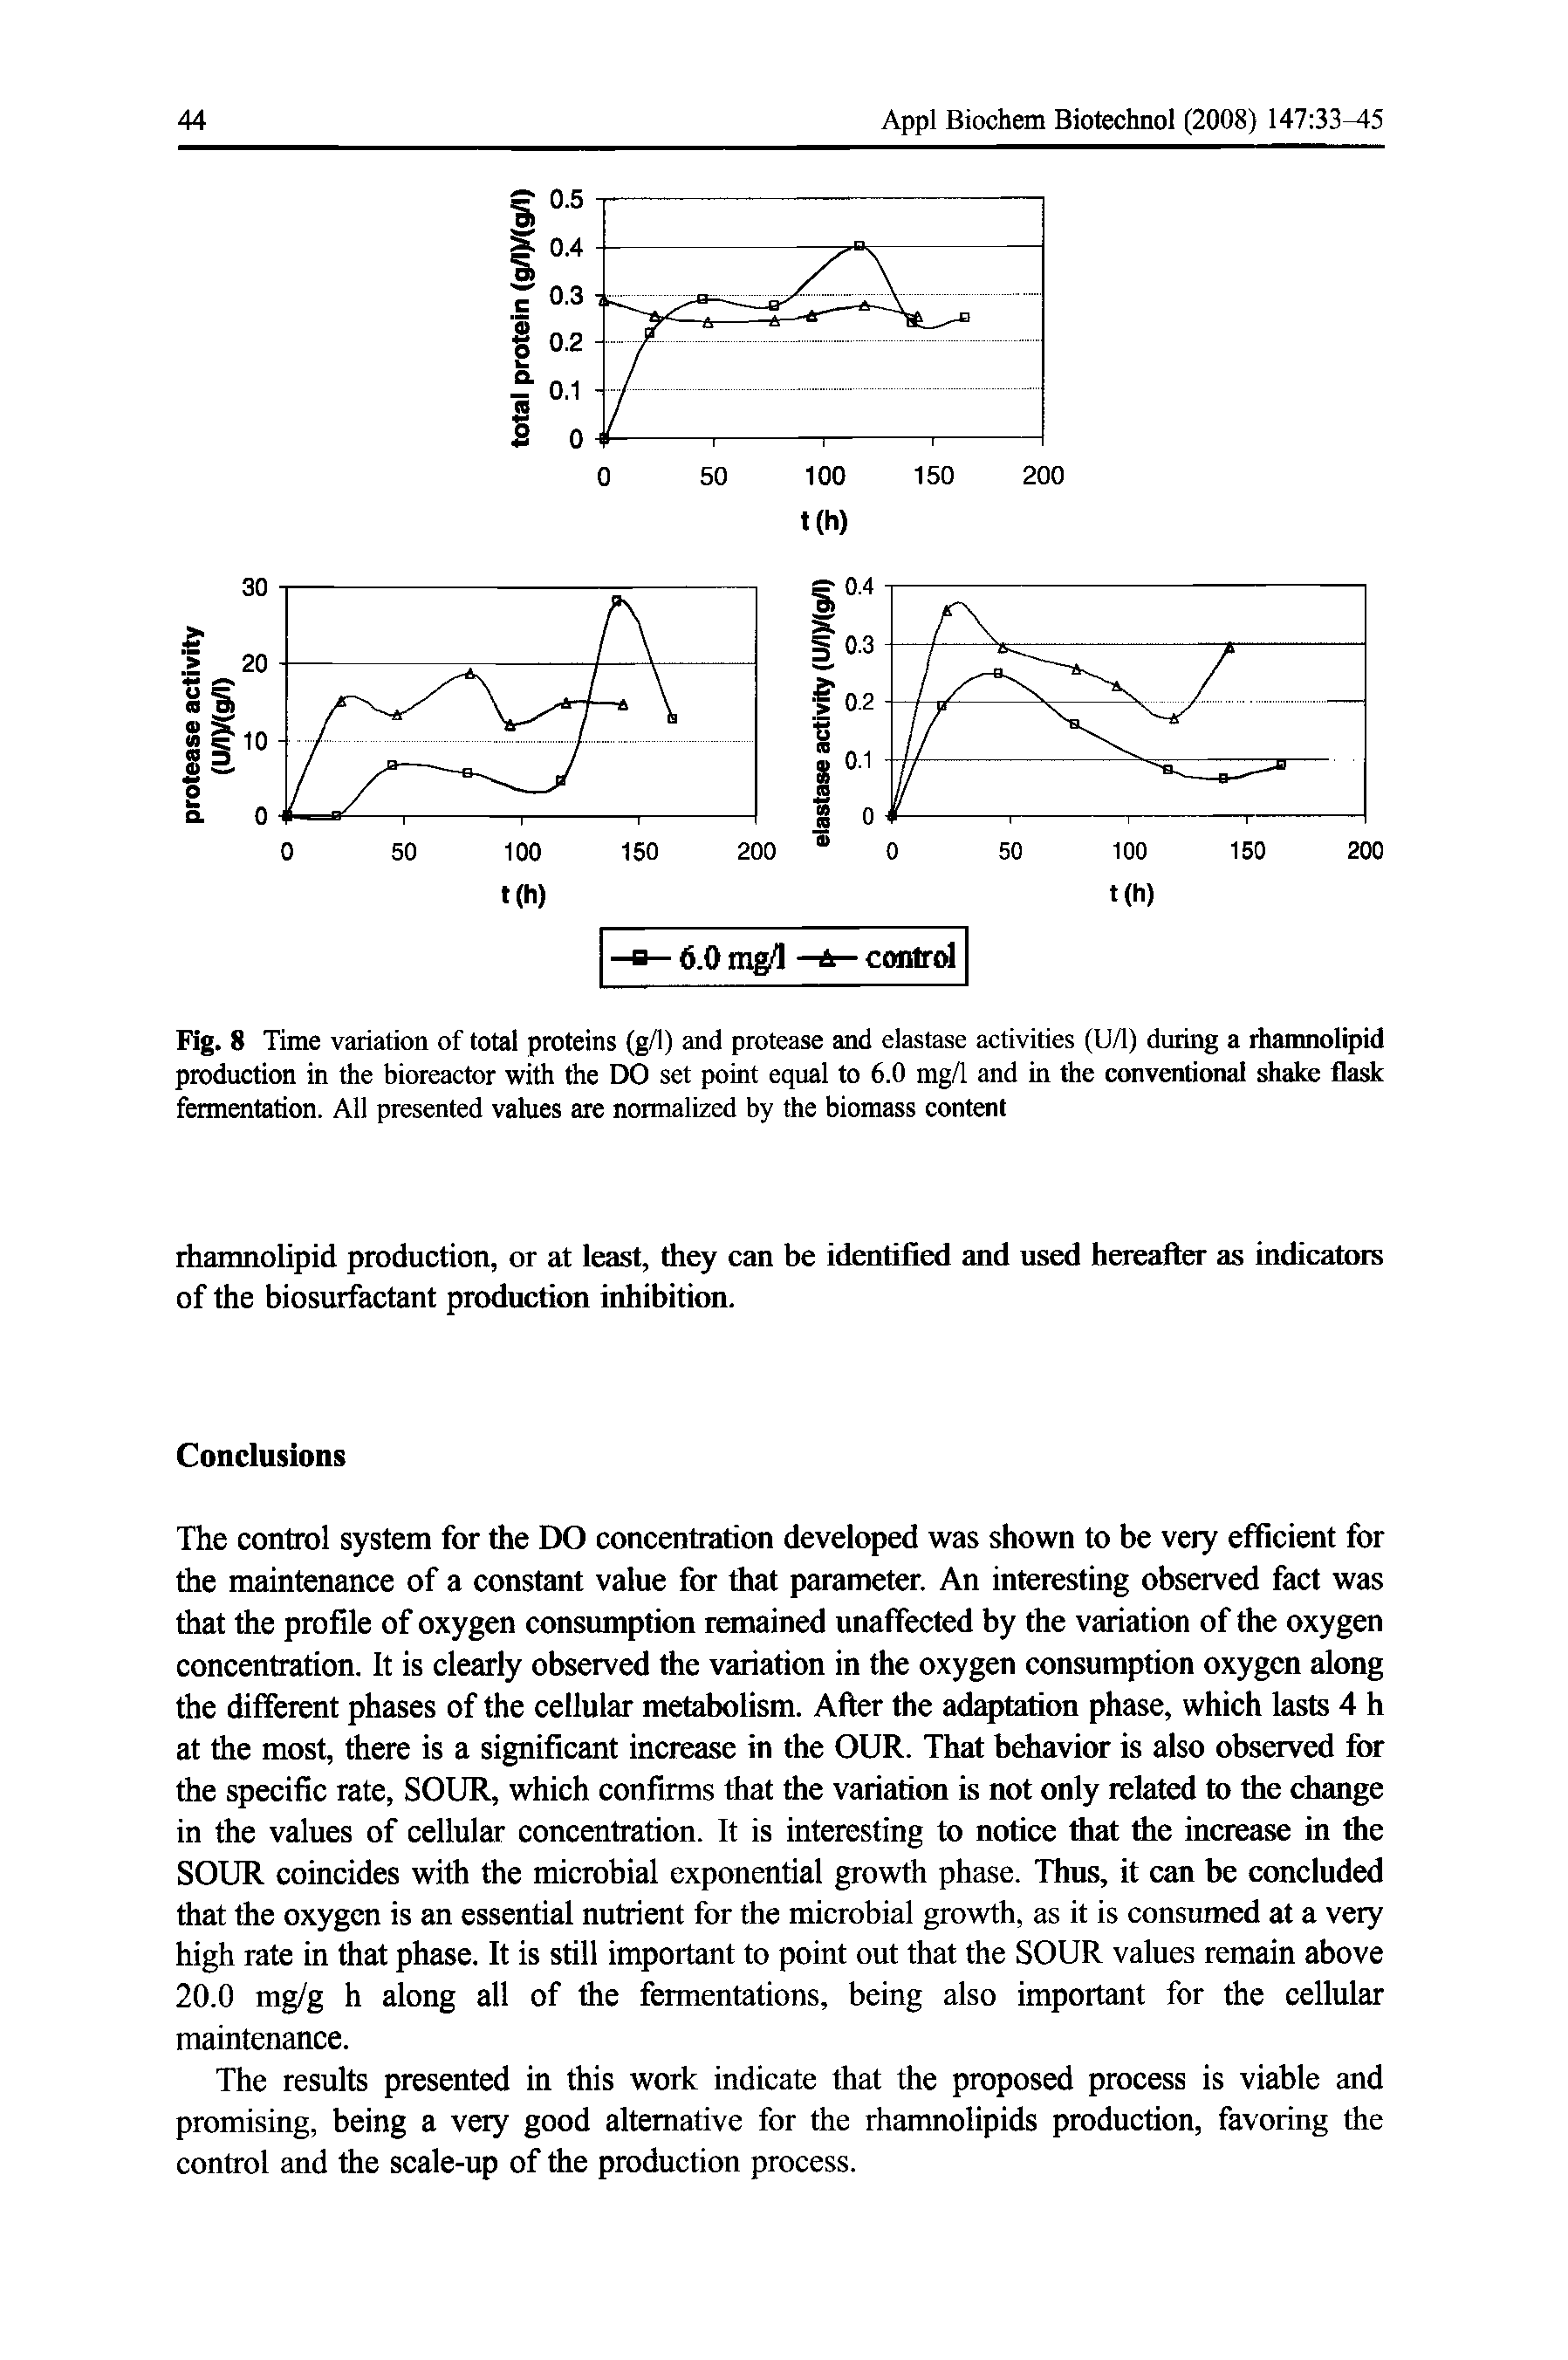 Fig. 8 Time variation of total proteins (g/1) and protease and elastase activities (U/1) during a rhamnolipid production in the bioreactor with the DO set point equal to 6.0 mg/1 and in the conventional shake flask fermentation. All presented values are normalized by the biomass content...